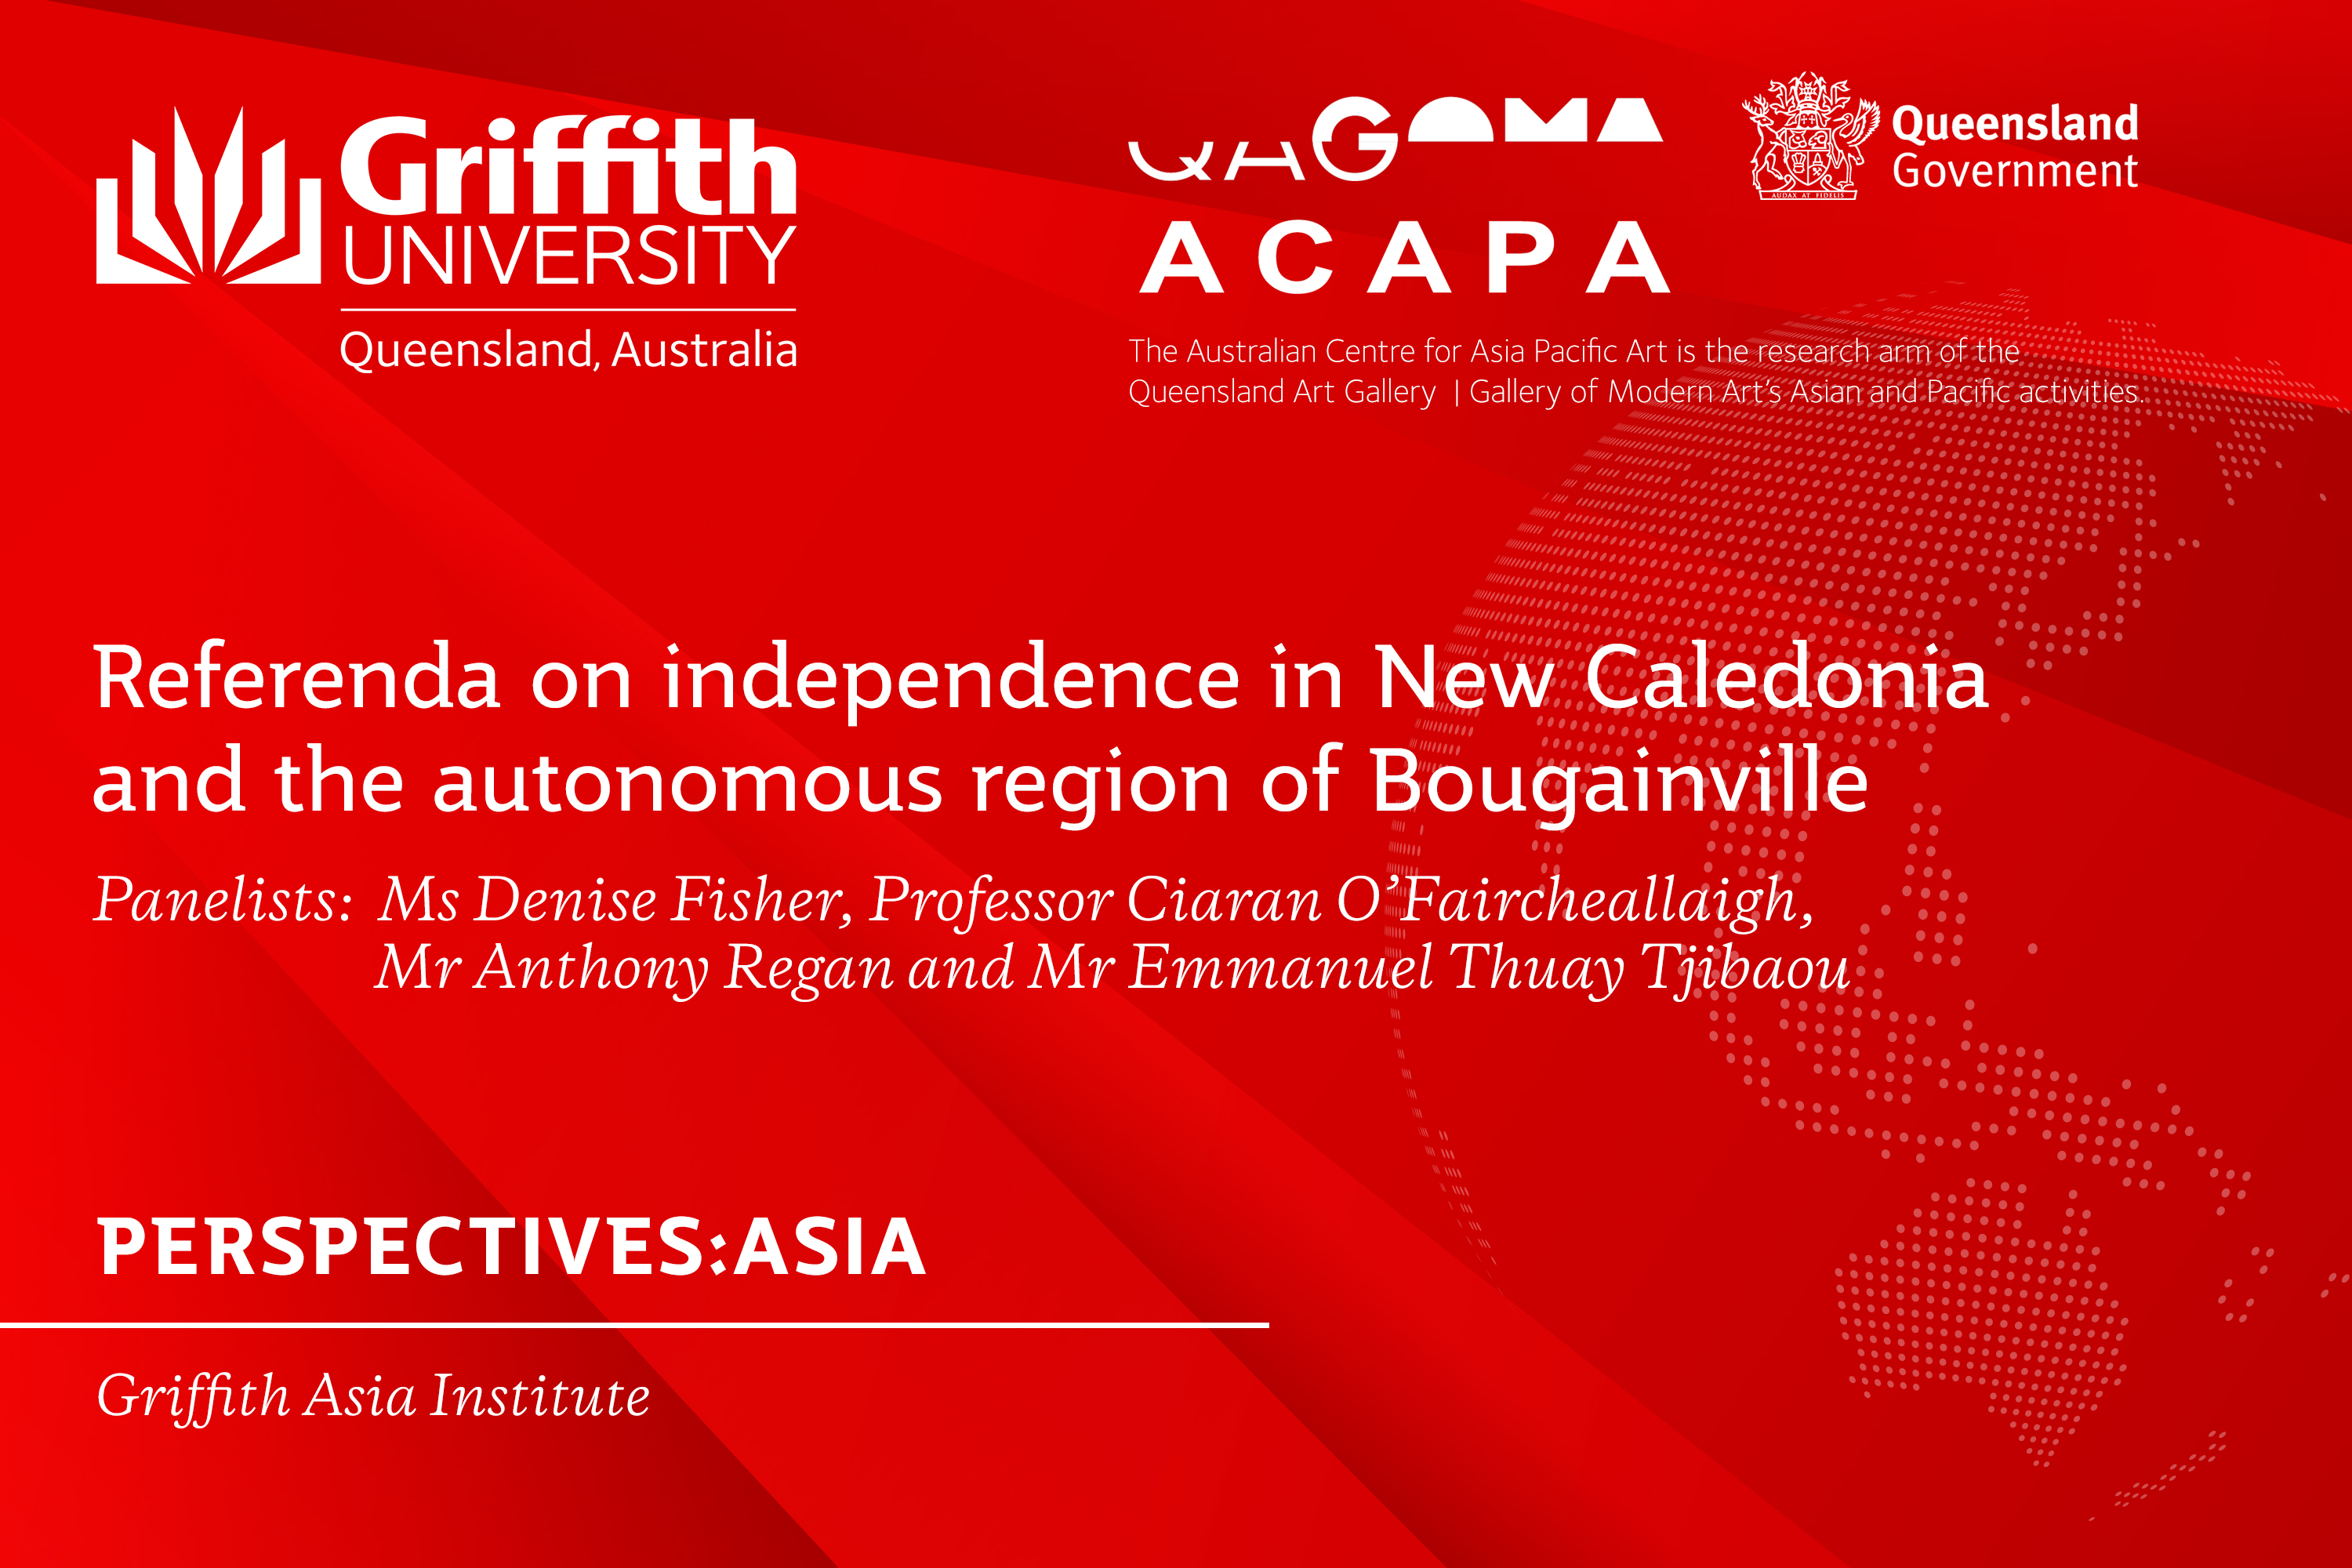 Perspectives:Asia Lecture: Referenda on independence in New Caledonia and the autonomous region of Bougainville